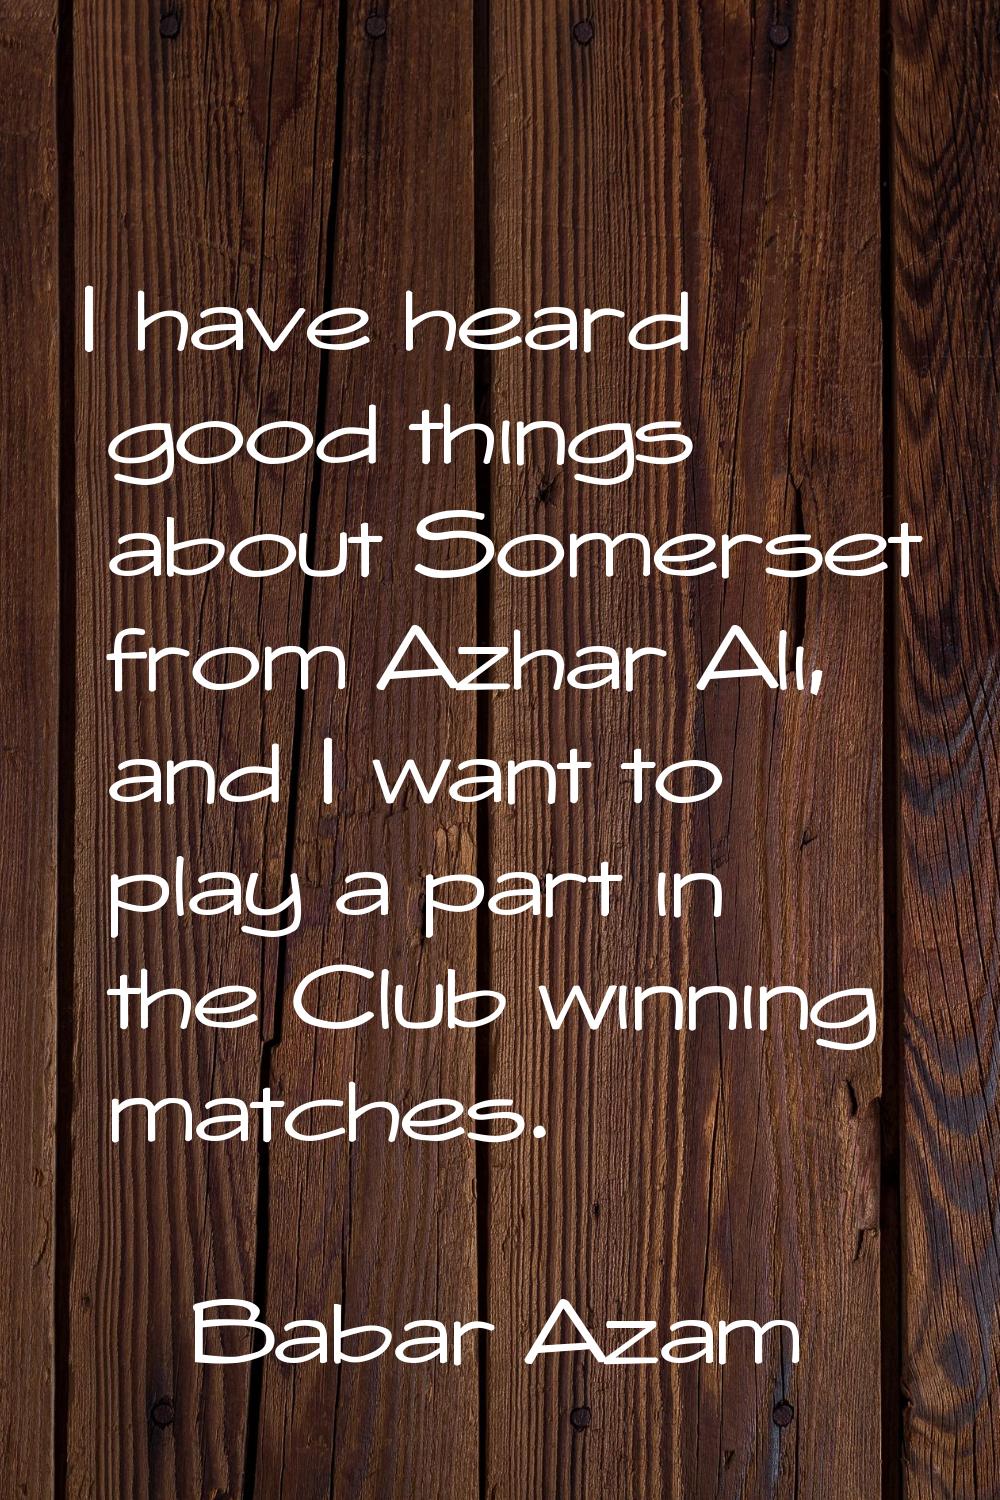 I have heard good things about Somerset from Azhar Ali, and I want to play a part in the Club winni